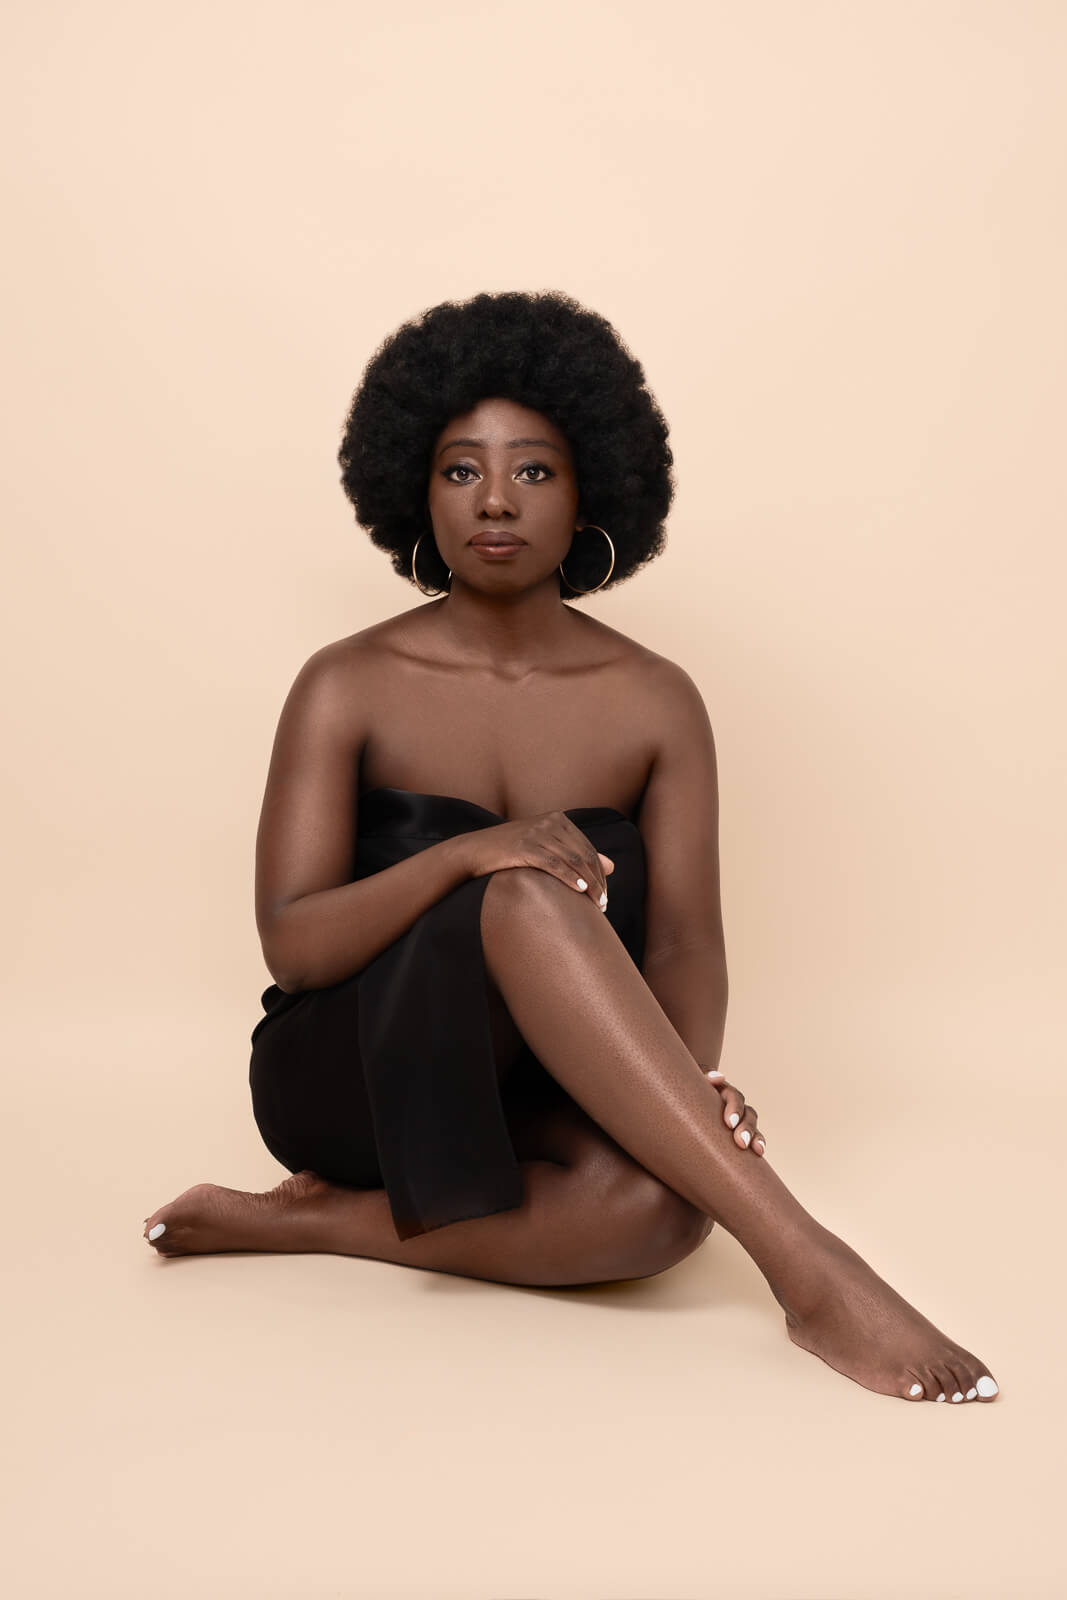 a black woman seated on the floor for boudoir poses at a London photoshoot